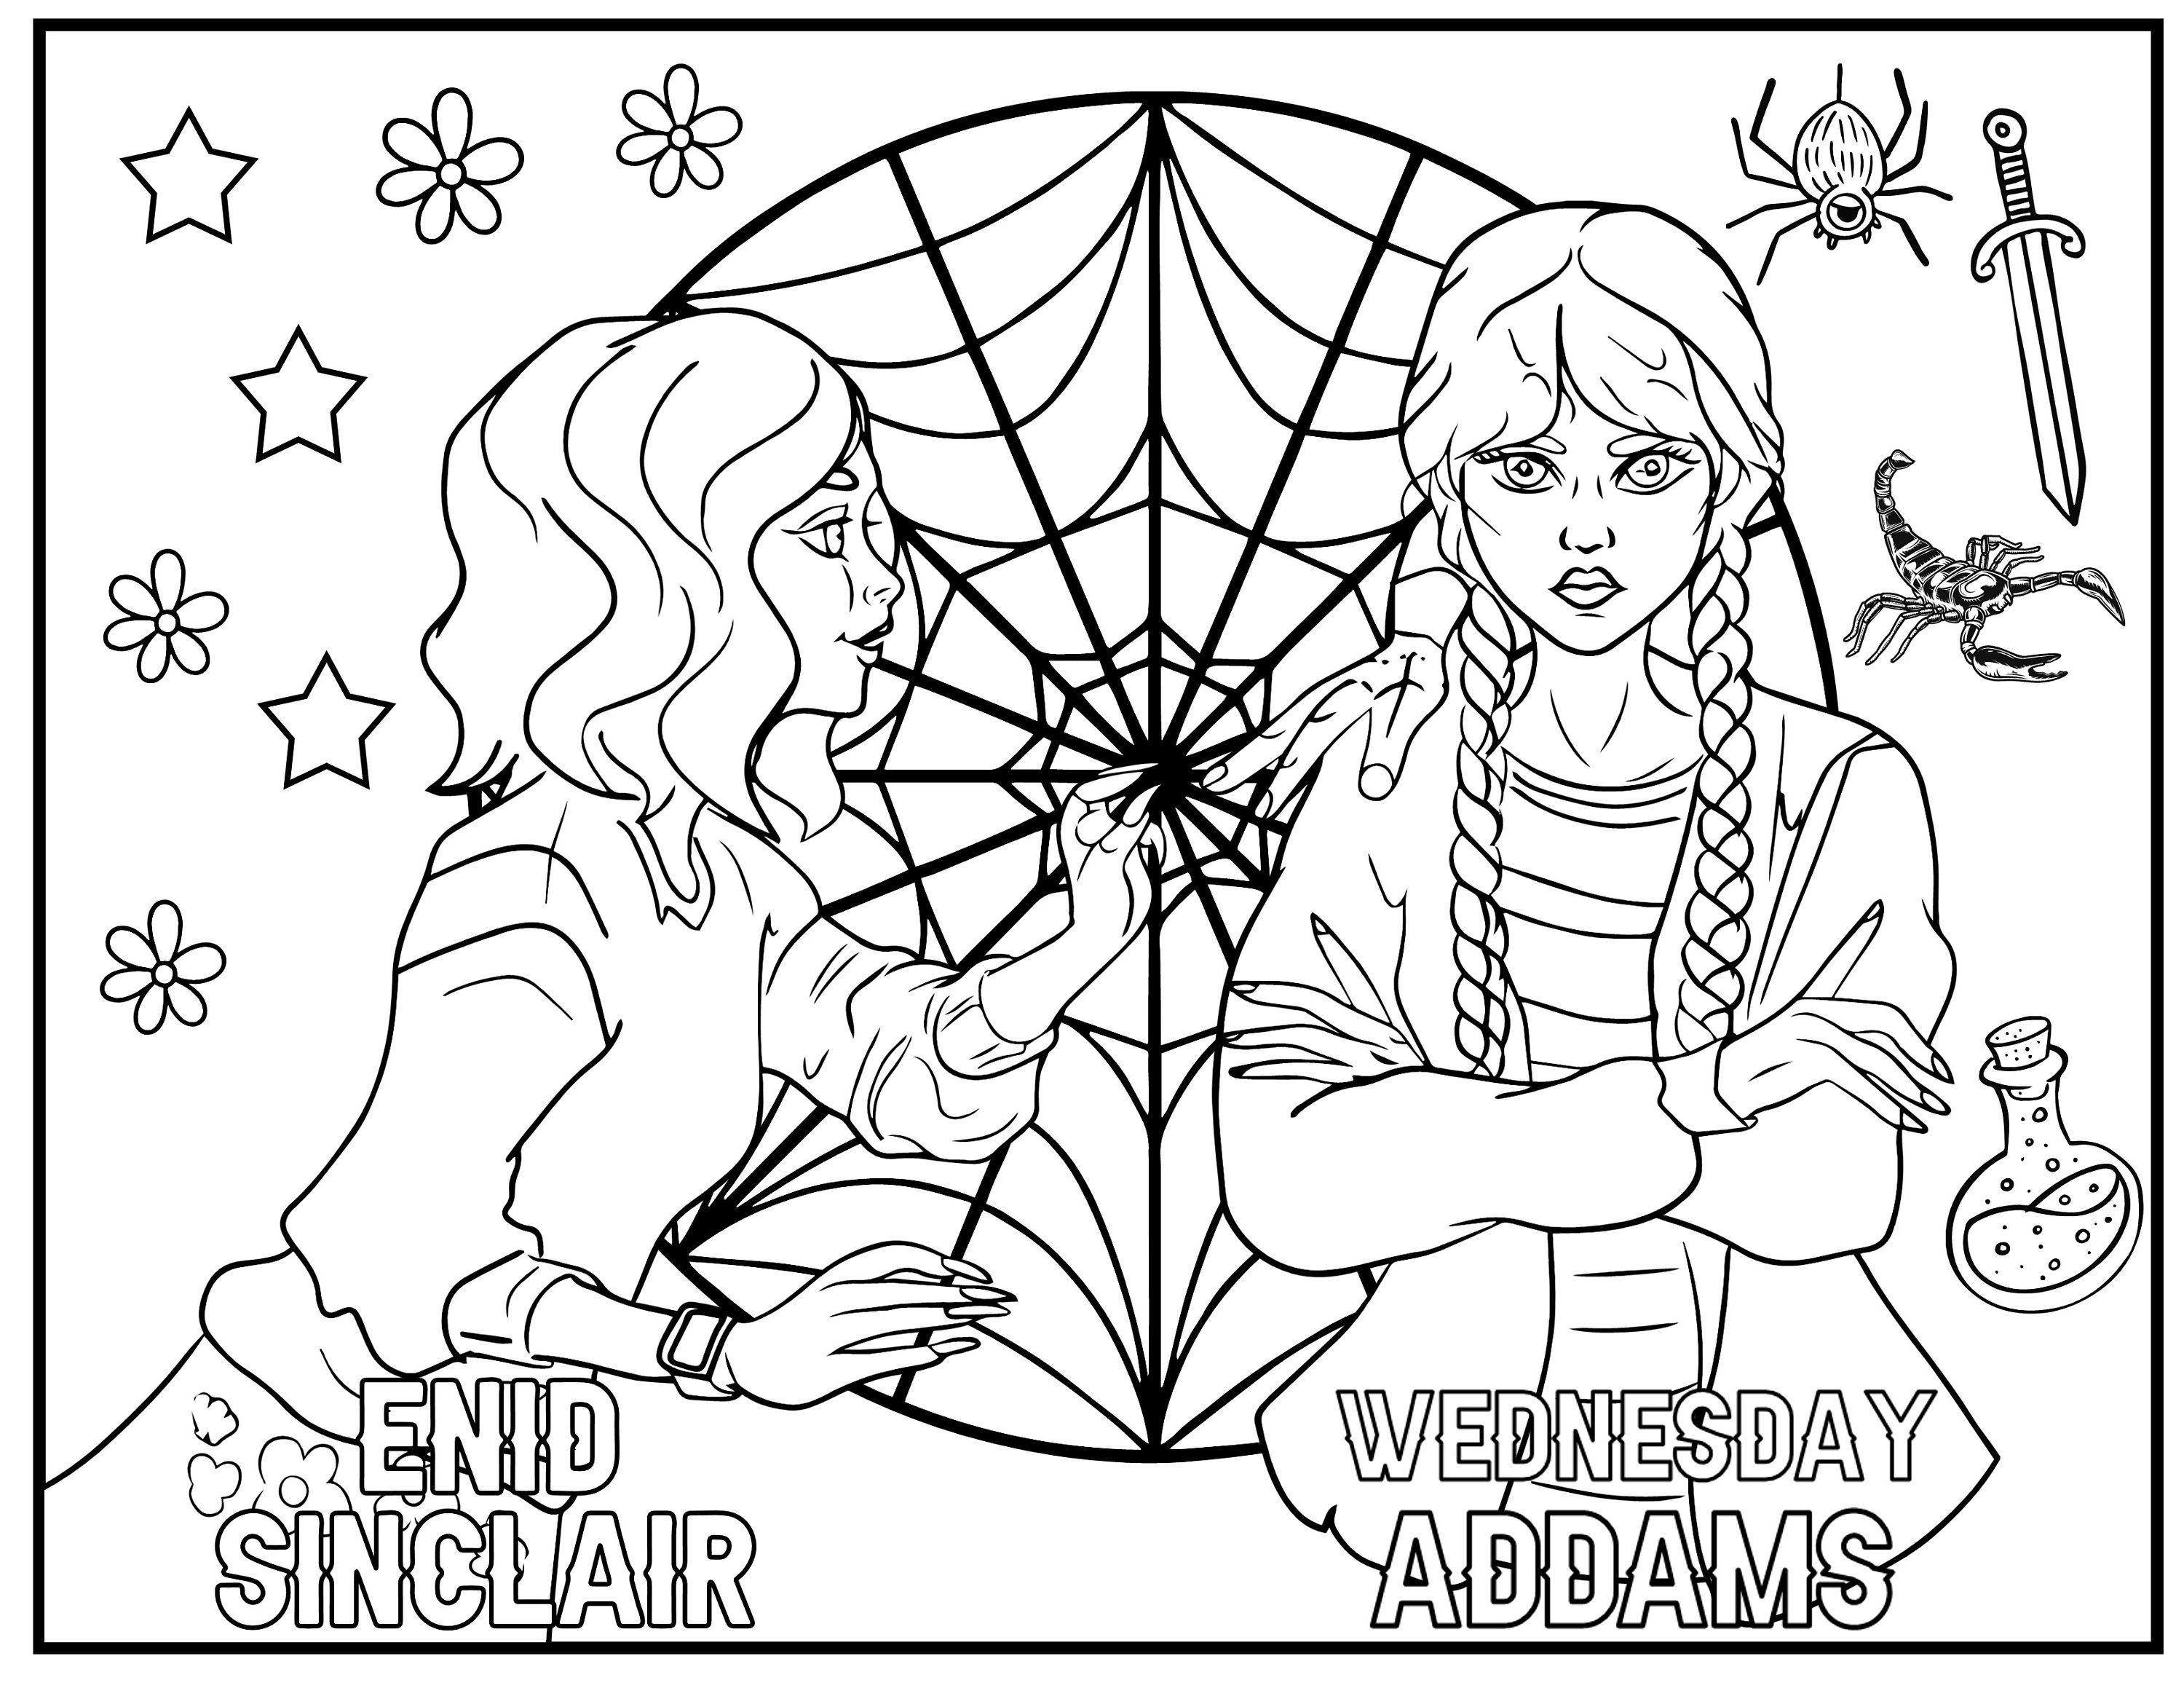 Wednesday coloring pages pdf format